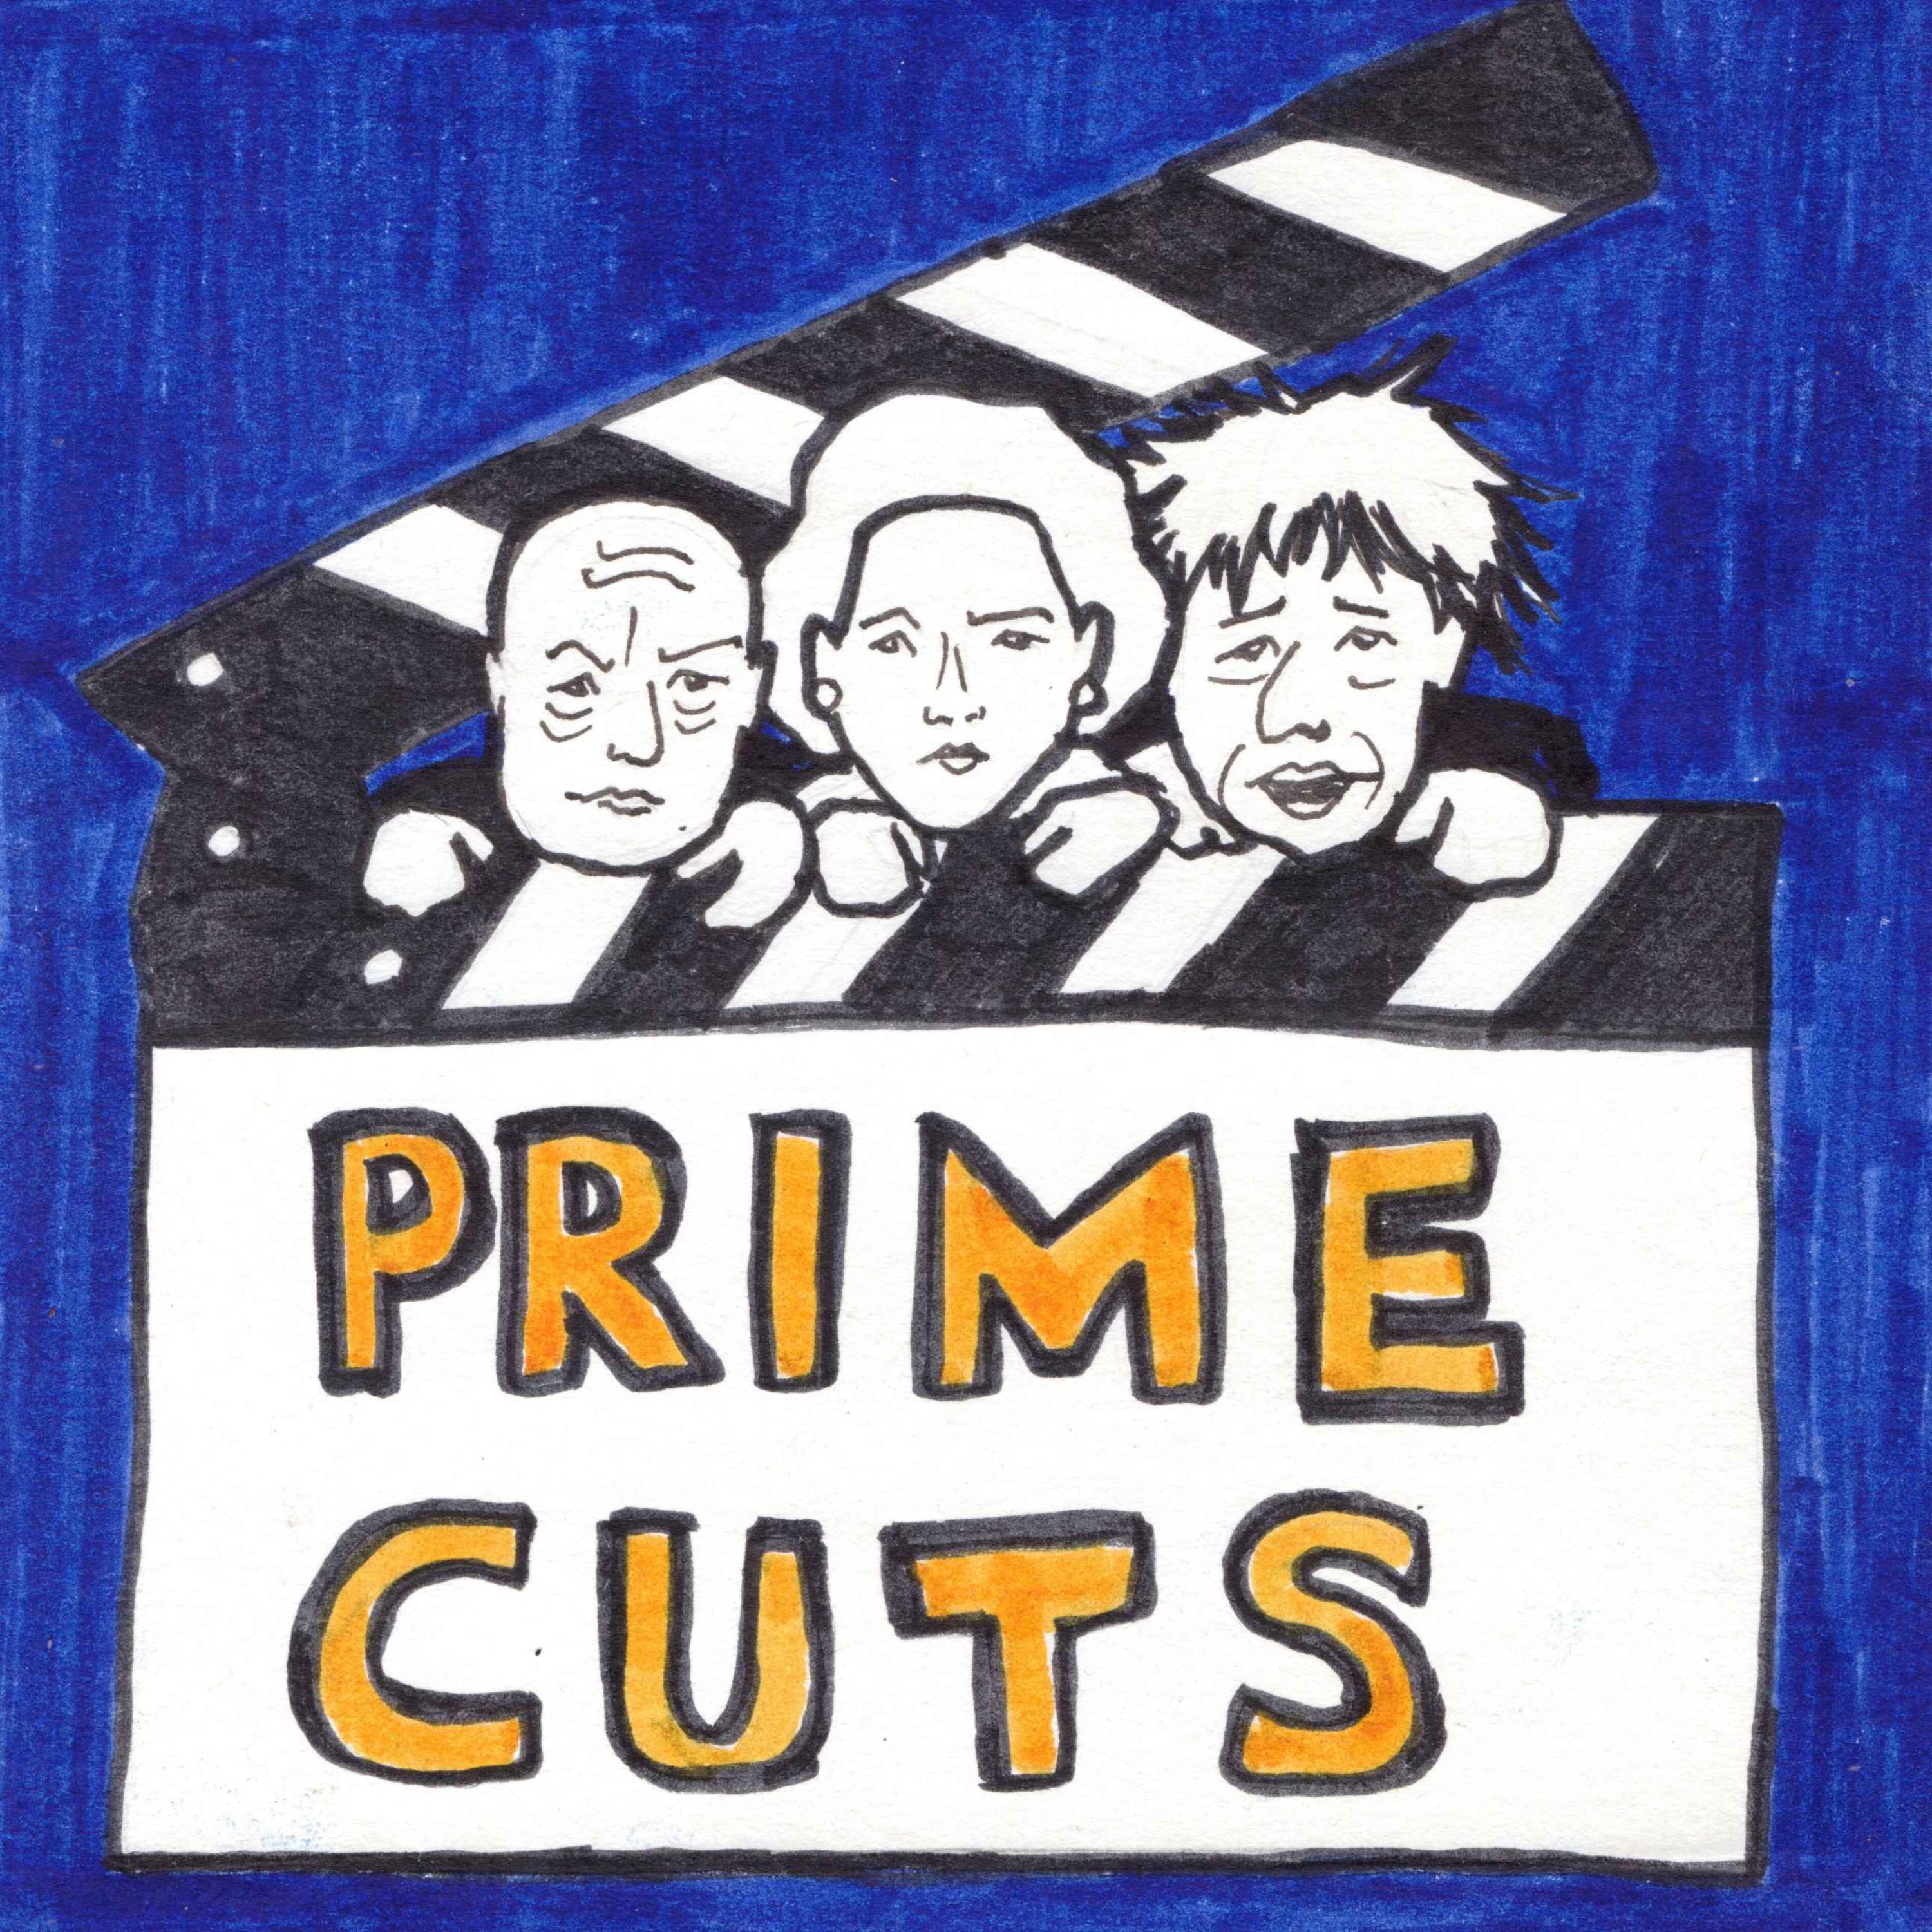 Prime Cuts: How laws are made